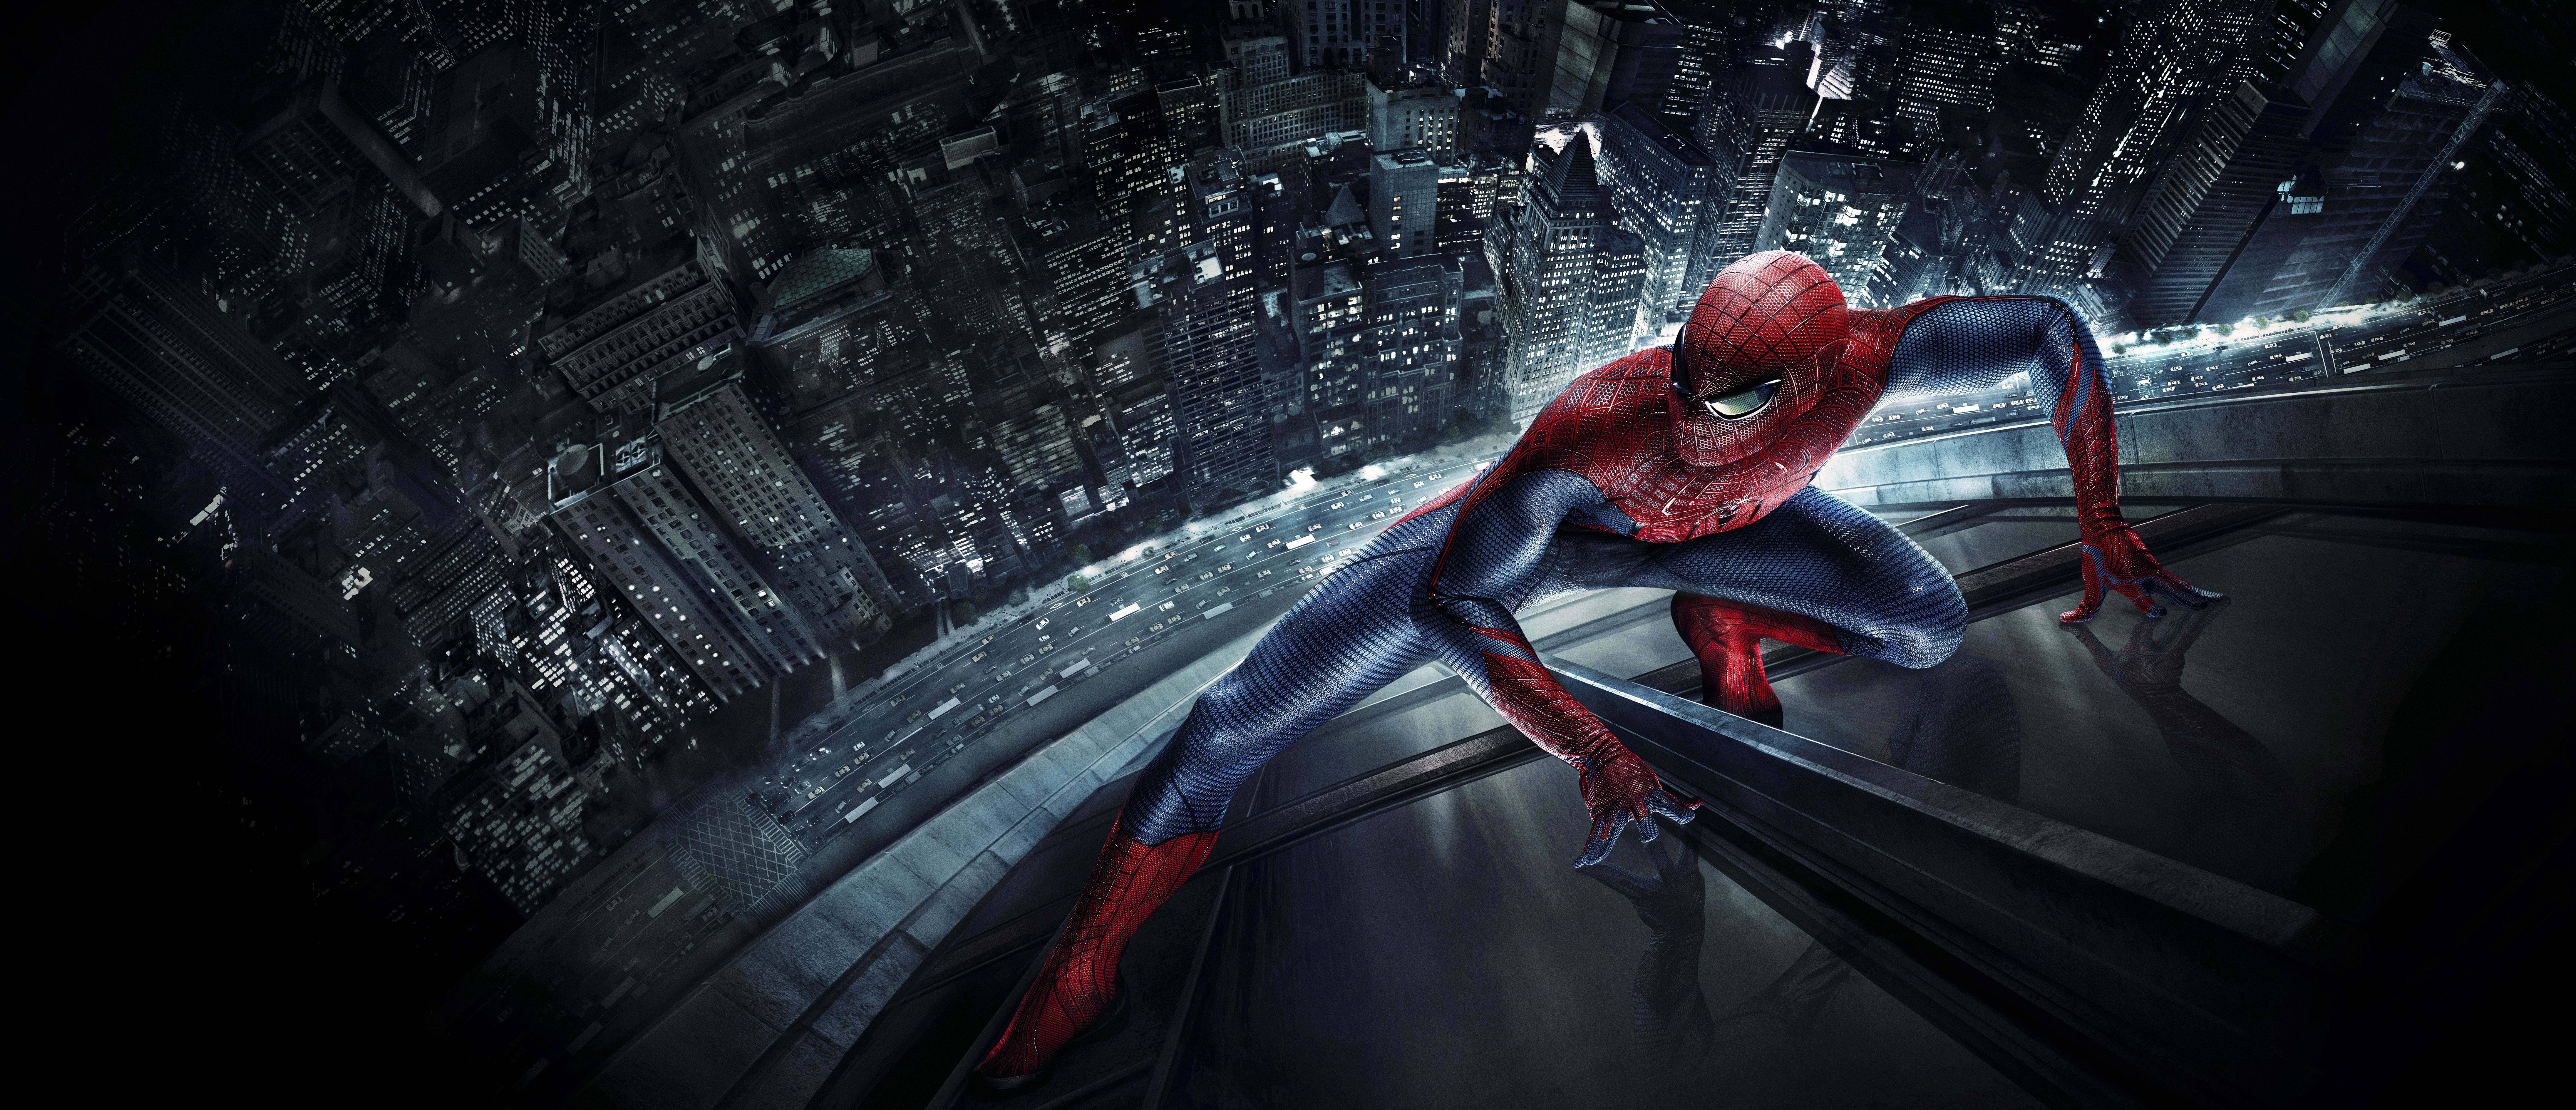 Wallpaper Spider-Man Fantasy Action - free pictures on Fonwall